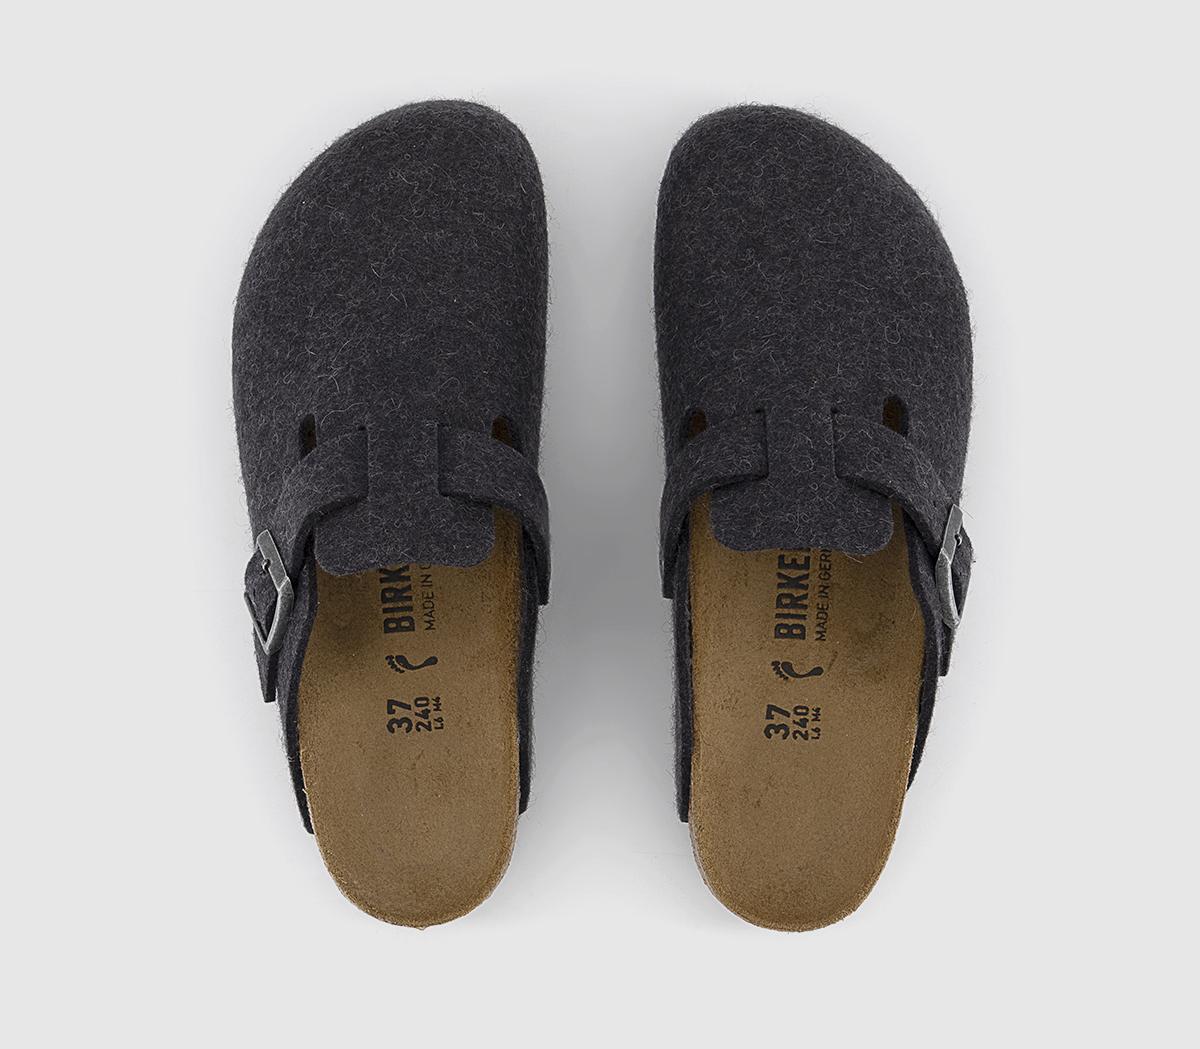 BIRKENSTOCK Boston Clogs Anthracite Wool - Flat Shoes for Women